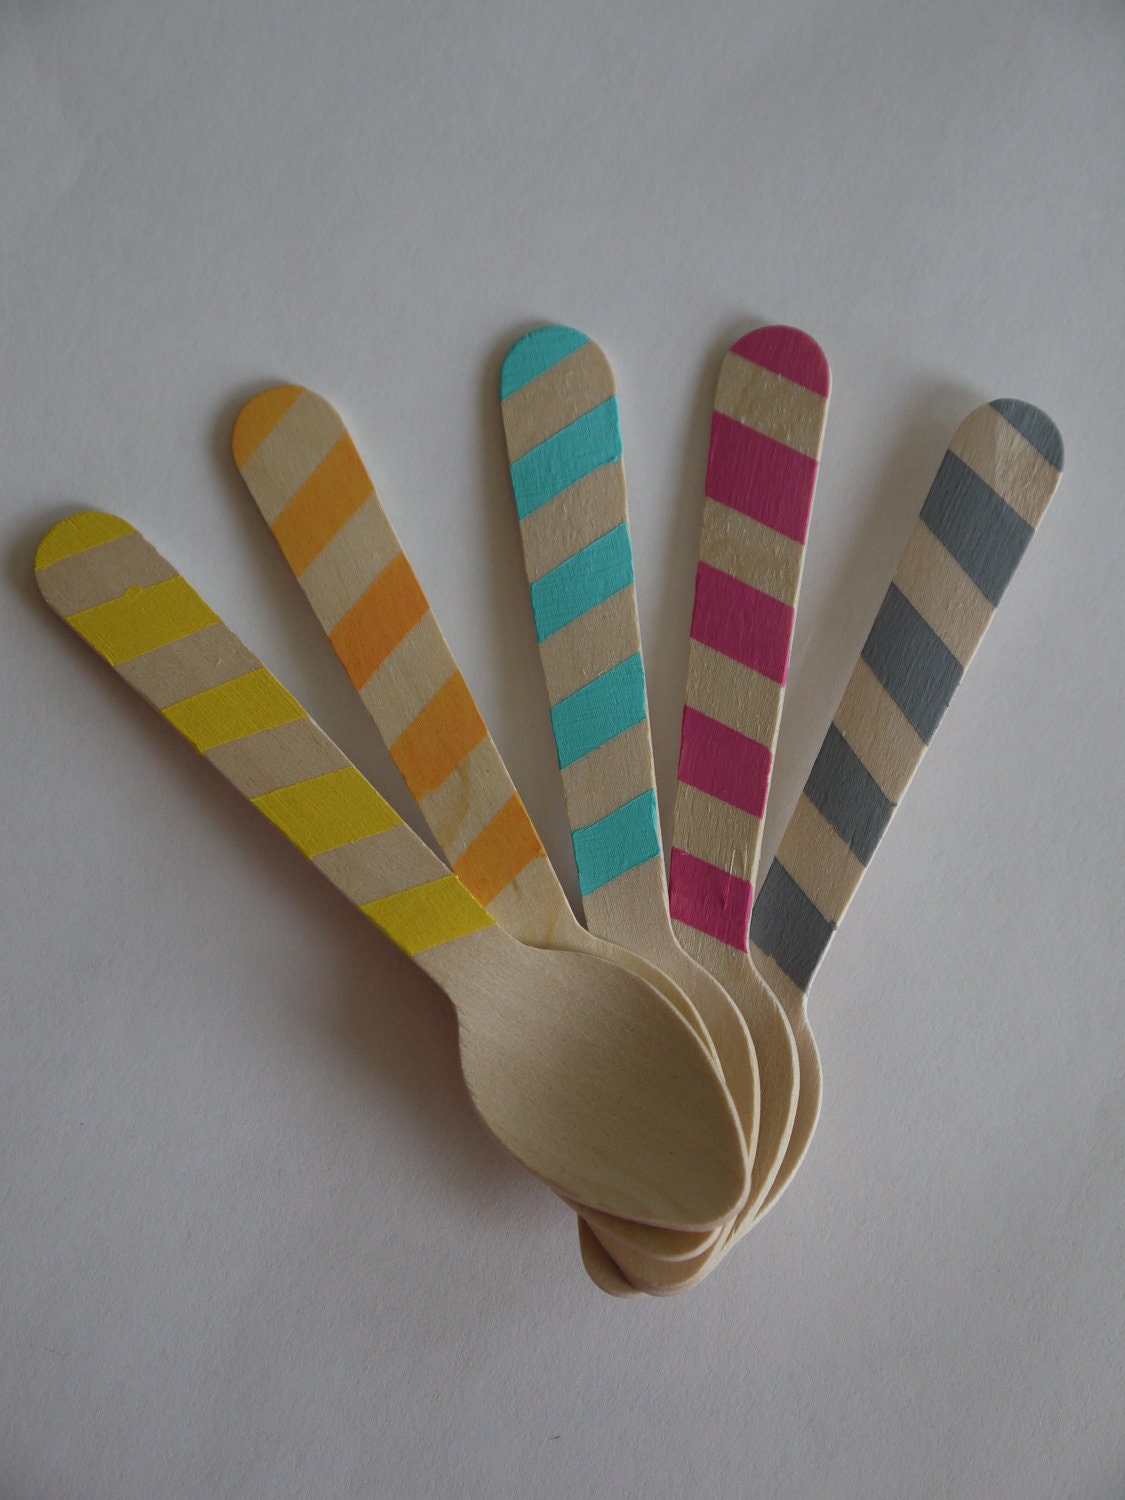 20 Wood Ice Cream Spoons - Graphic Stripes in Great Colors- Perfect For Parties